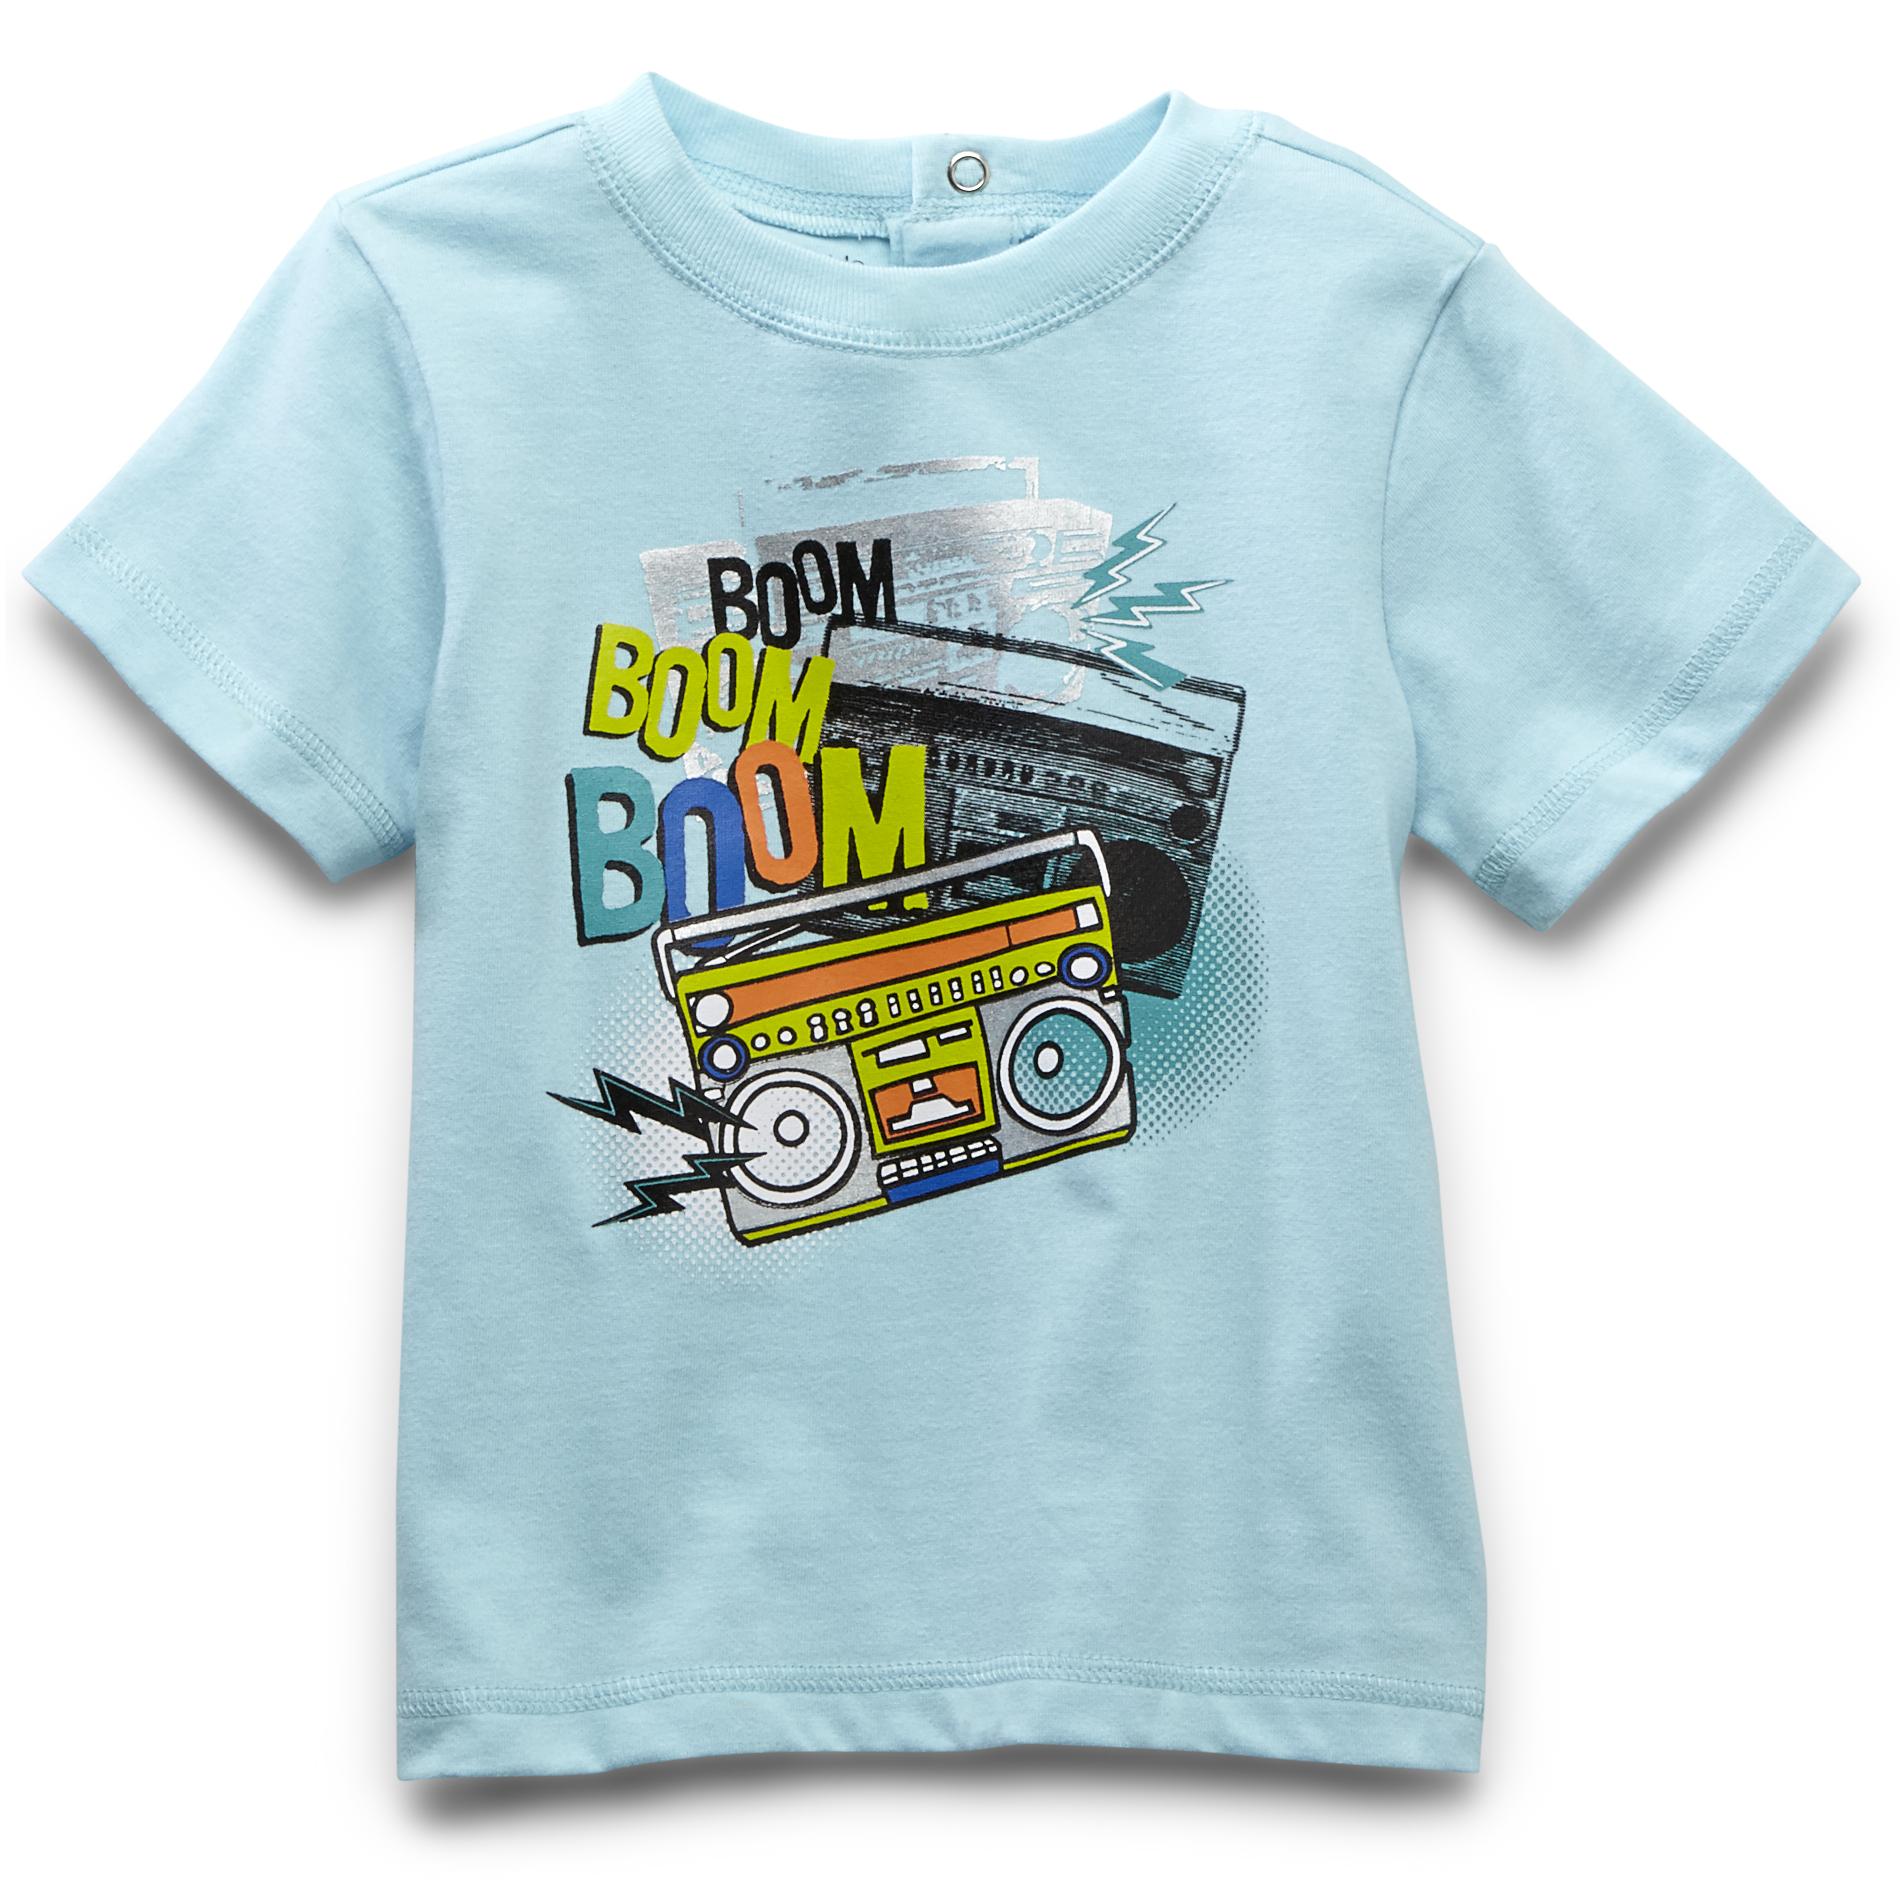 WonderKids Infant & Toddler Boy's Short-Sleeve Graphic T-Shirt - Boomboxes